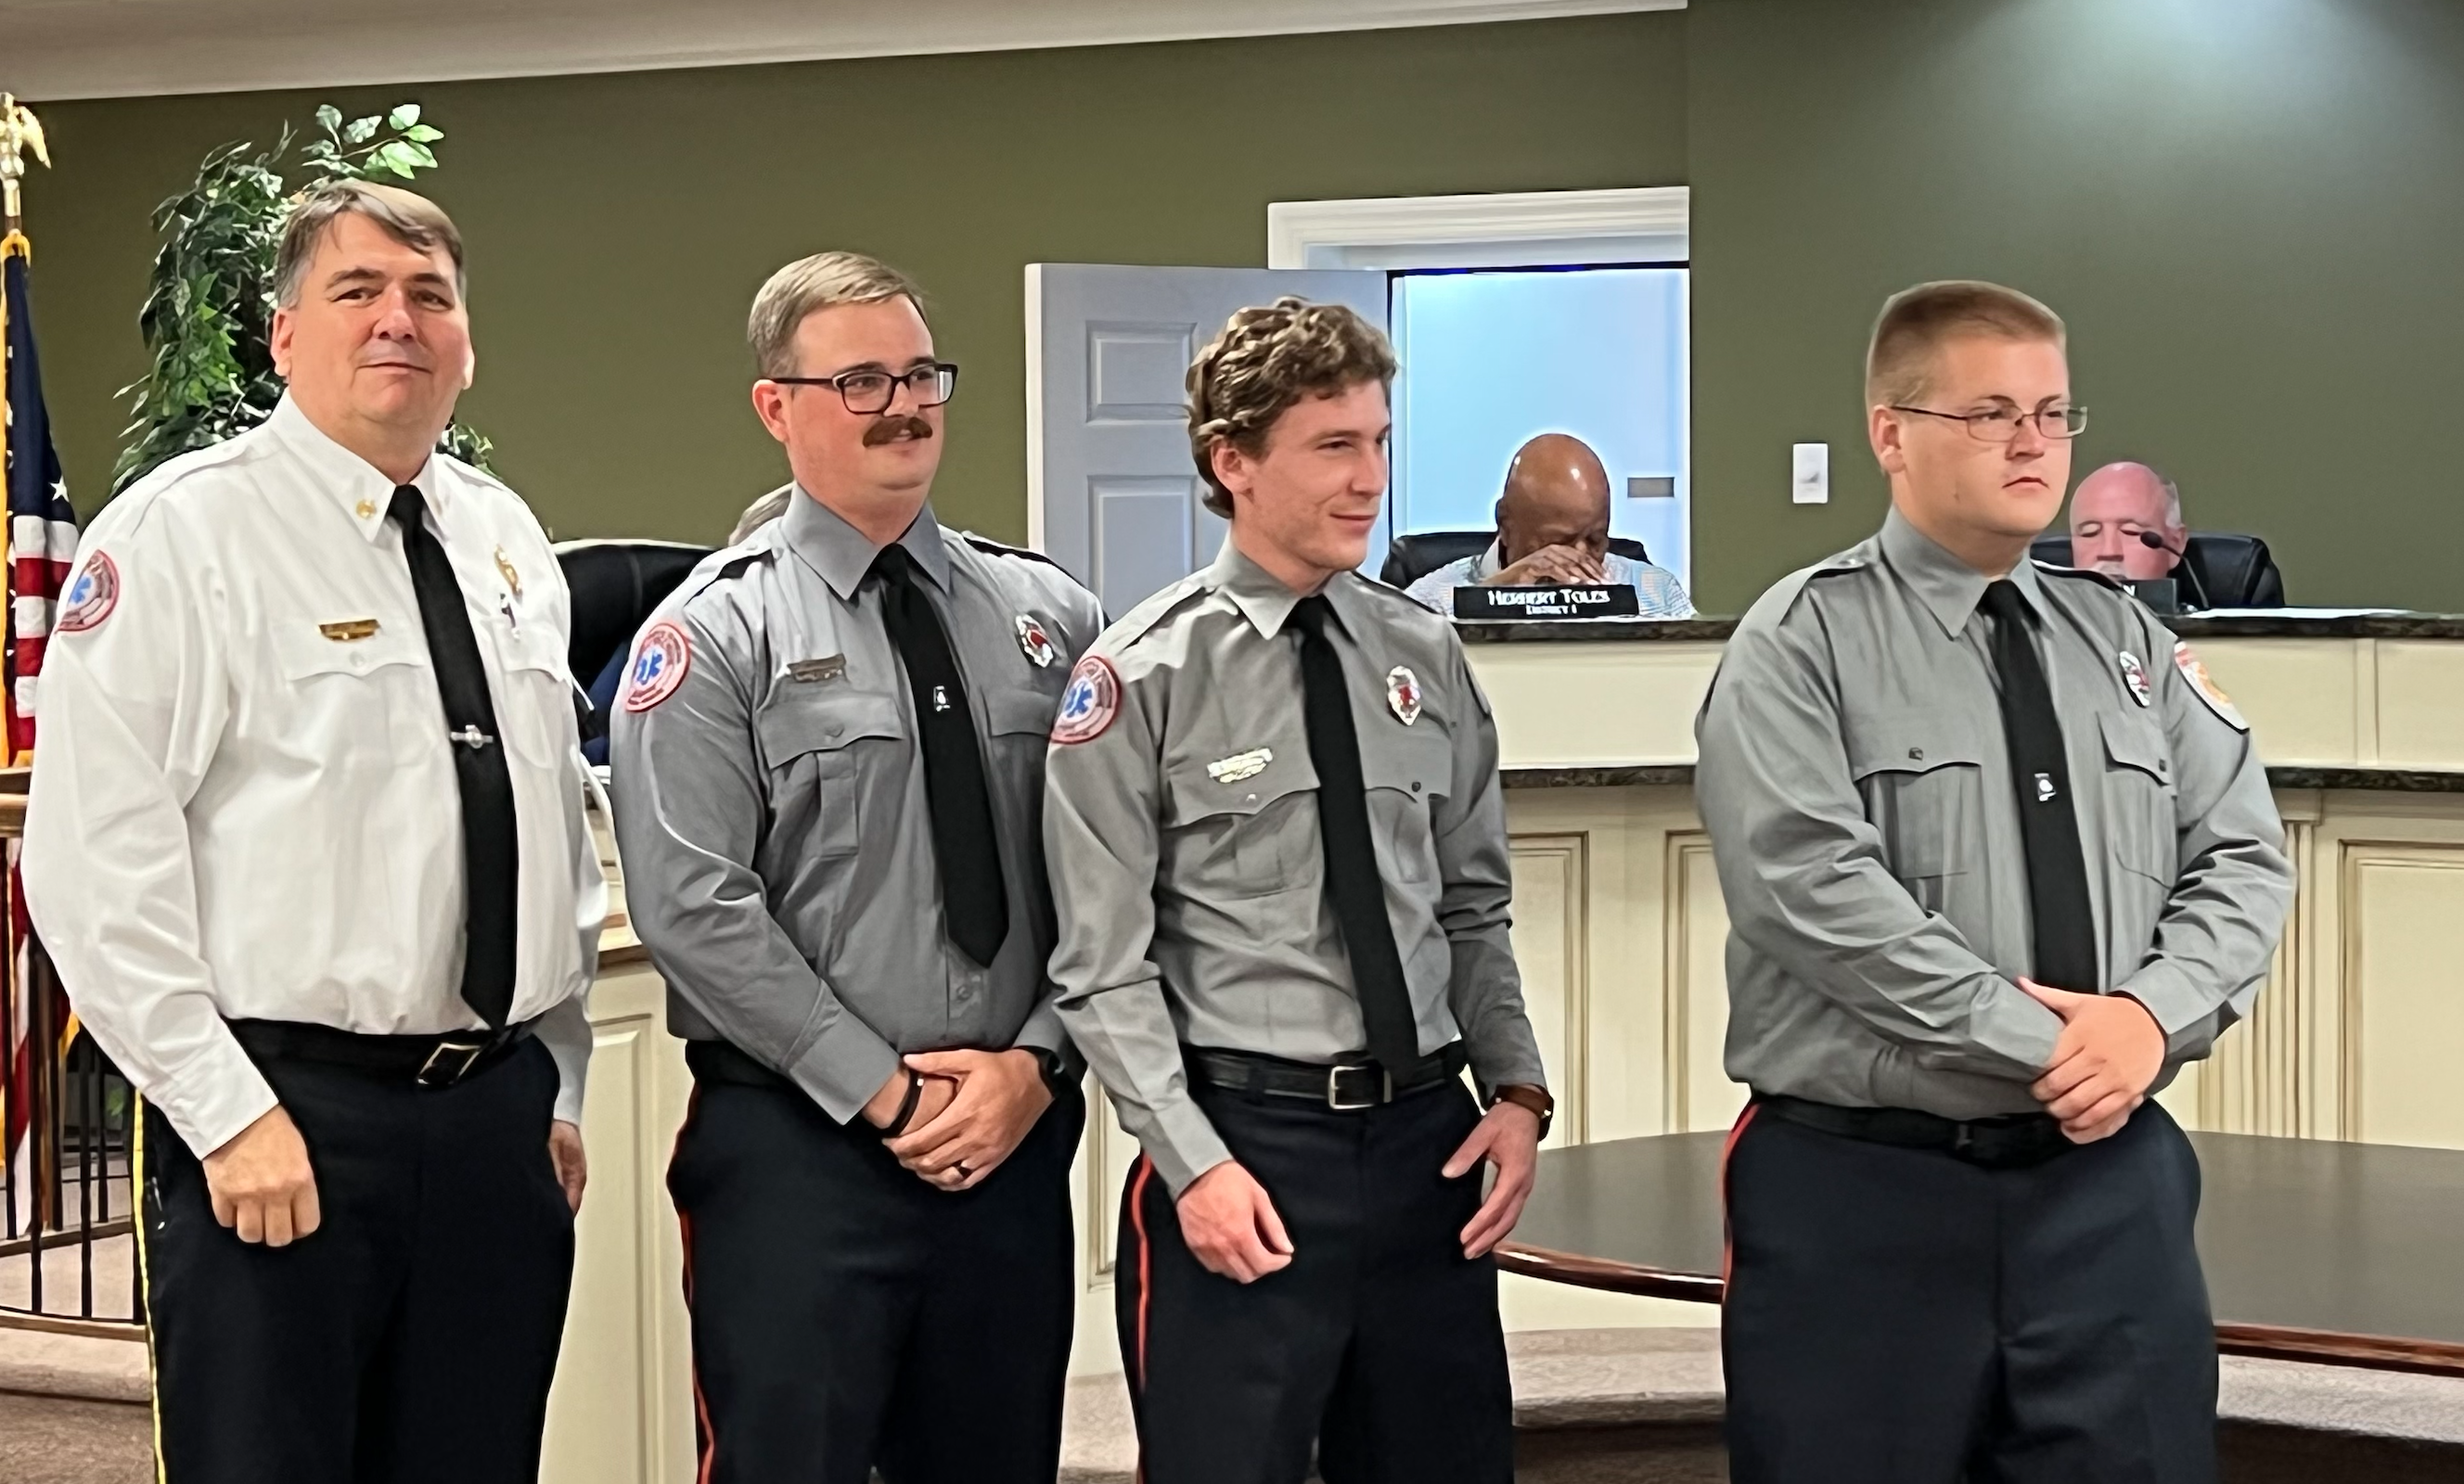 Springville Council honors firefighters for training and career accomplishments